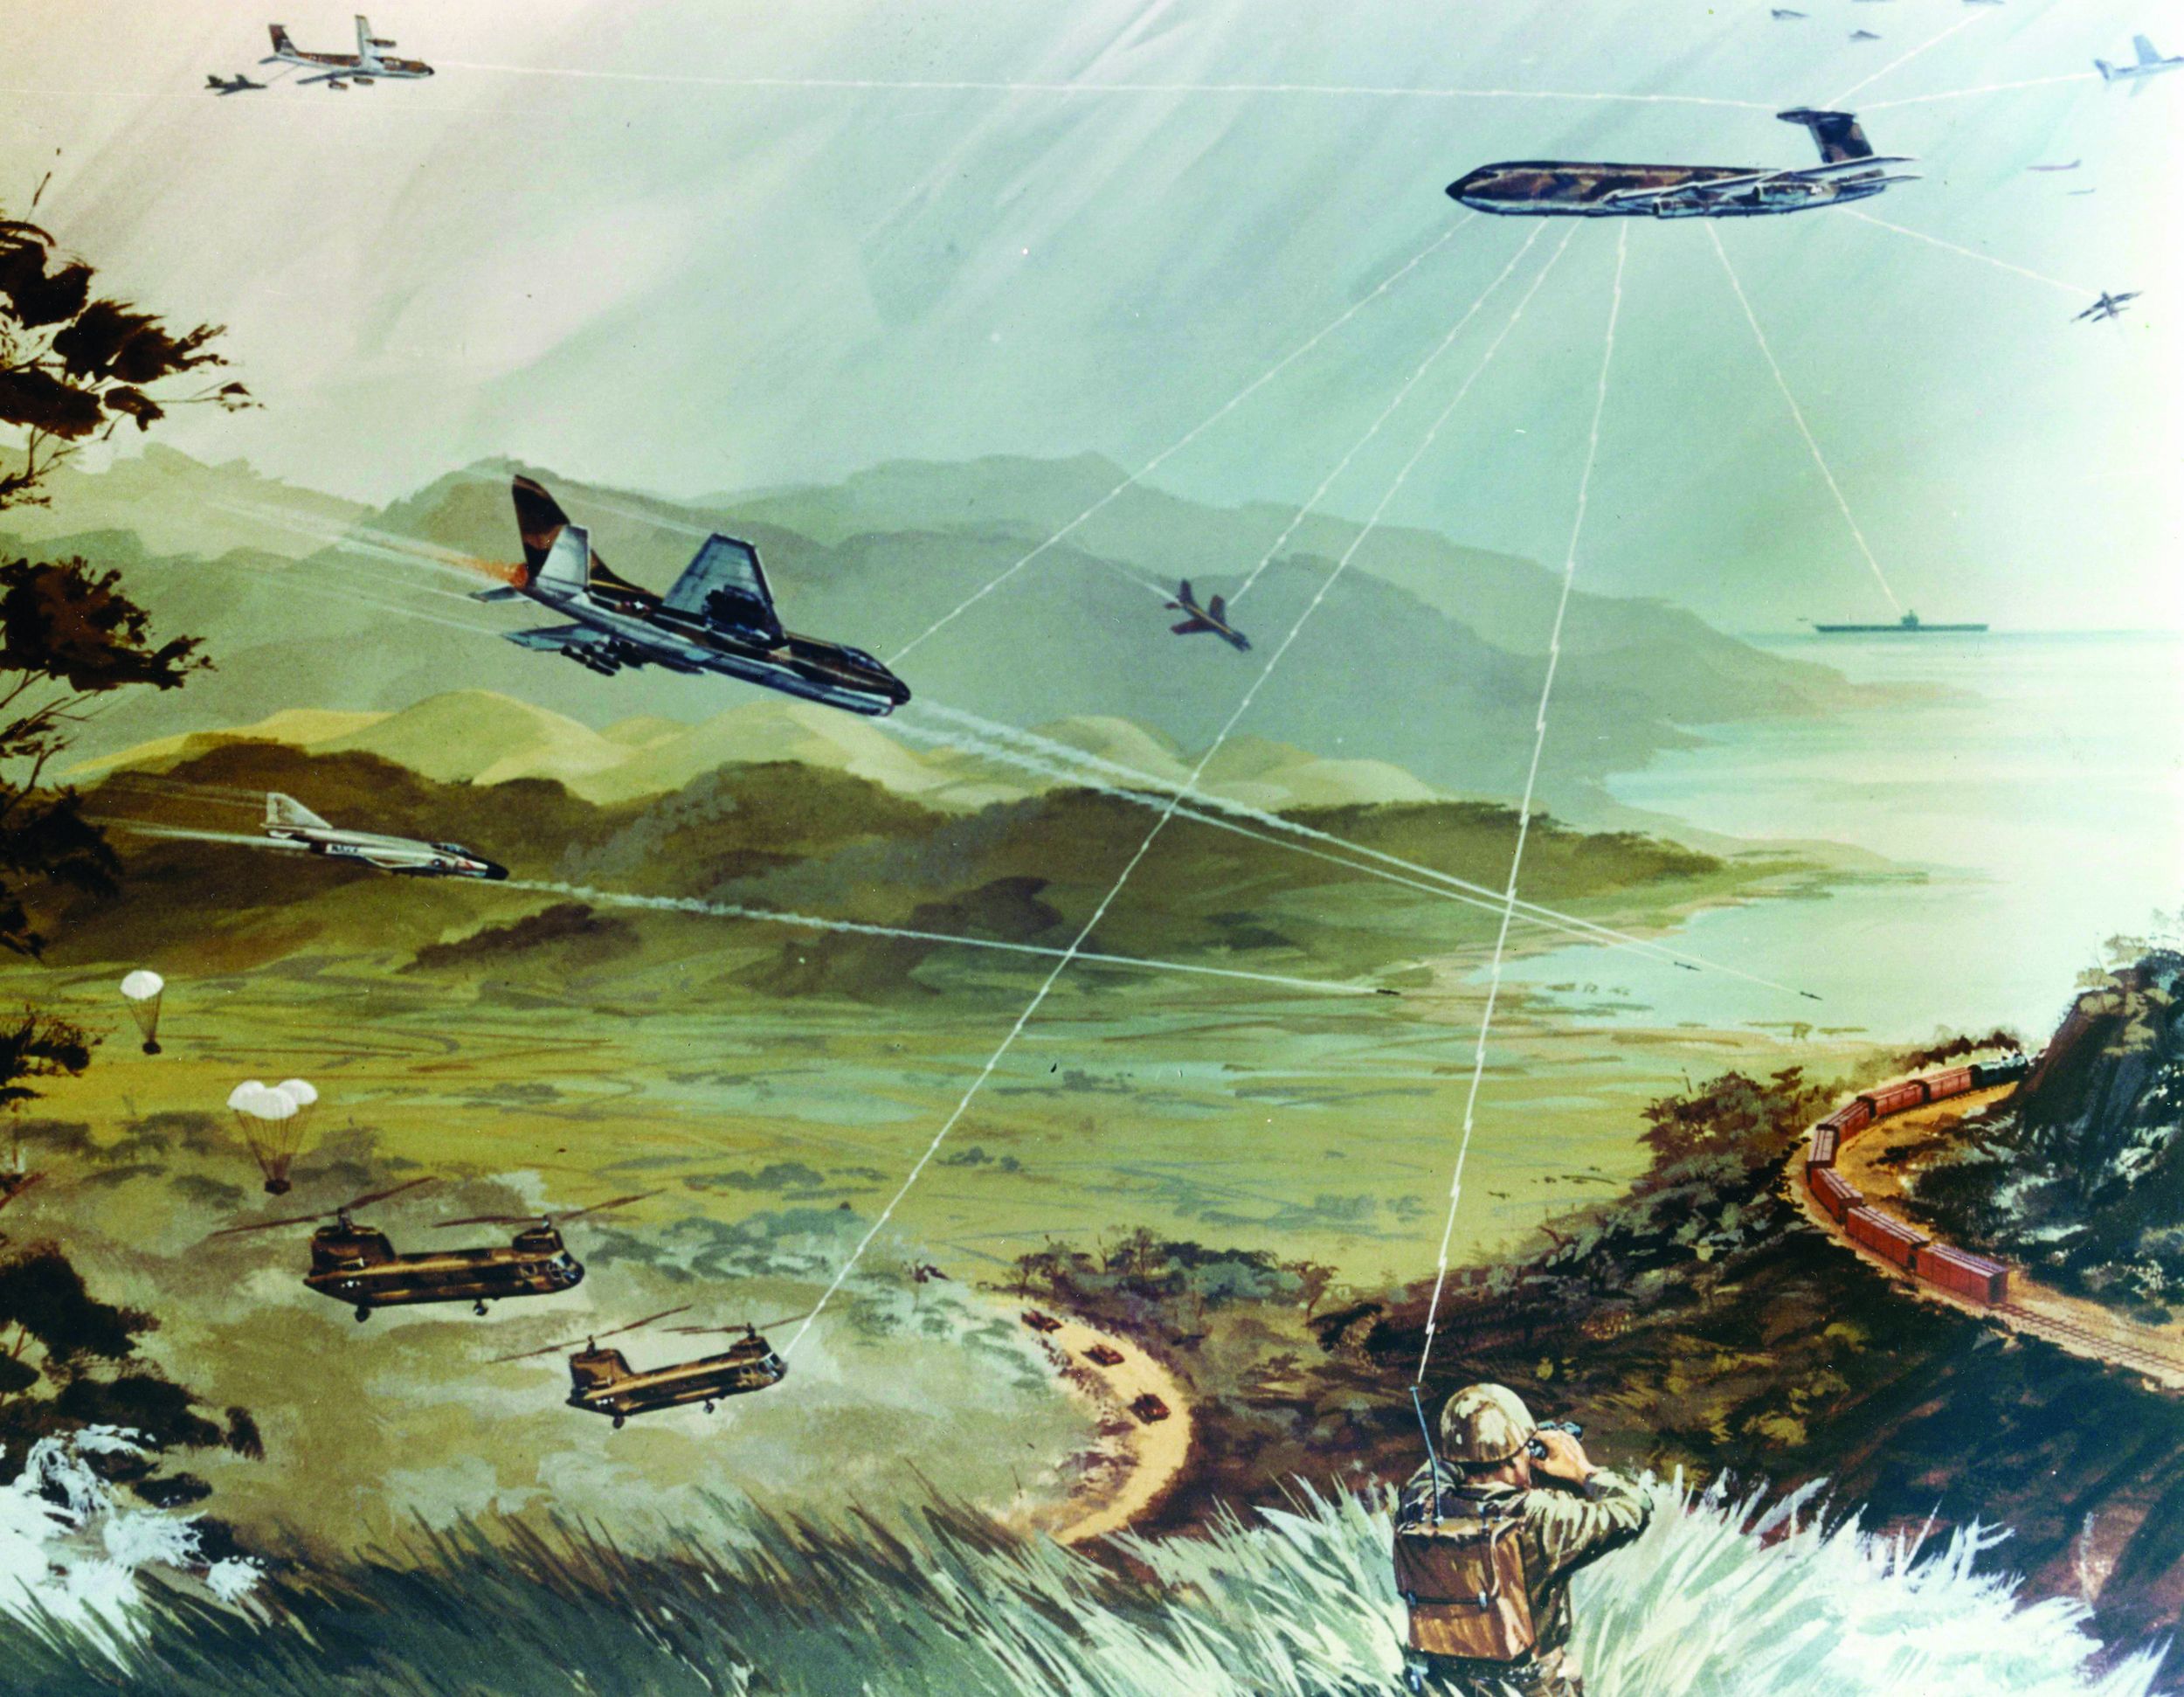 AWACS’ versatility is shown in this artist’s conception of AWACS carrying out a tactical air-land mission.